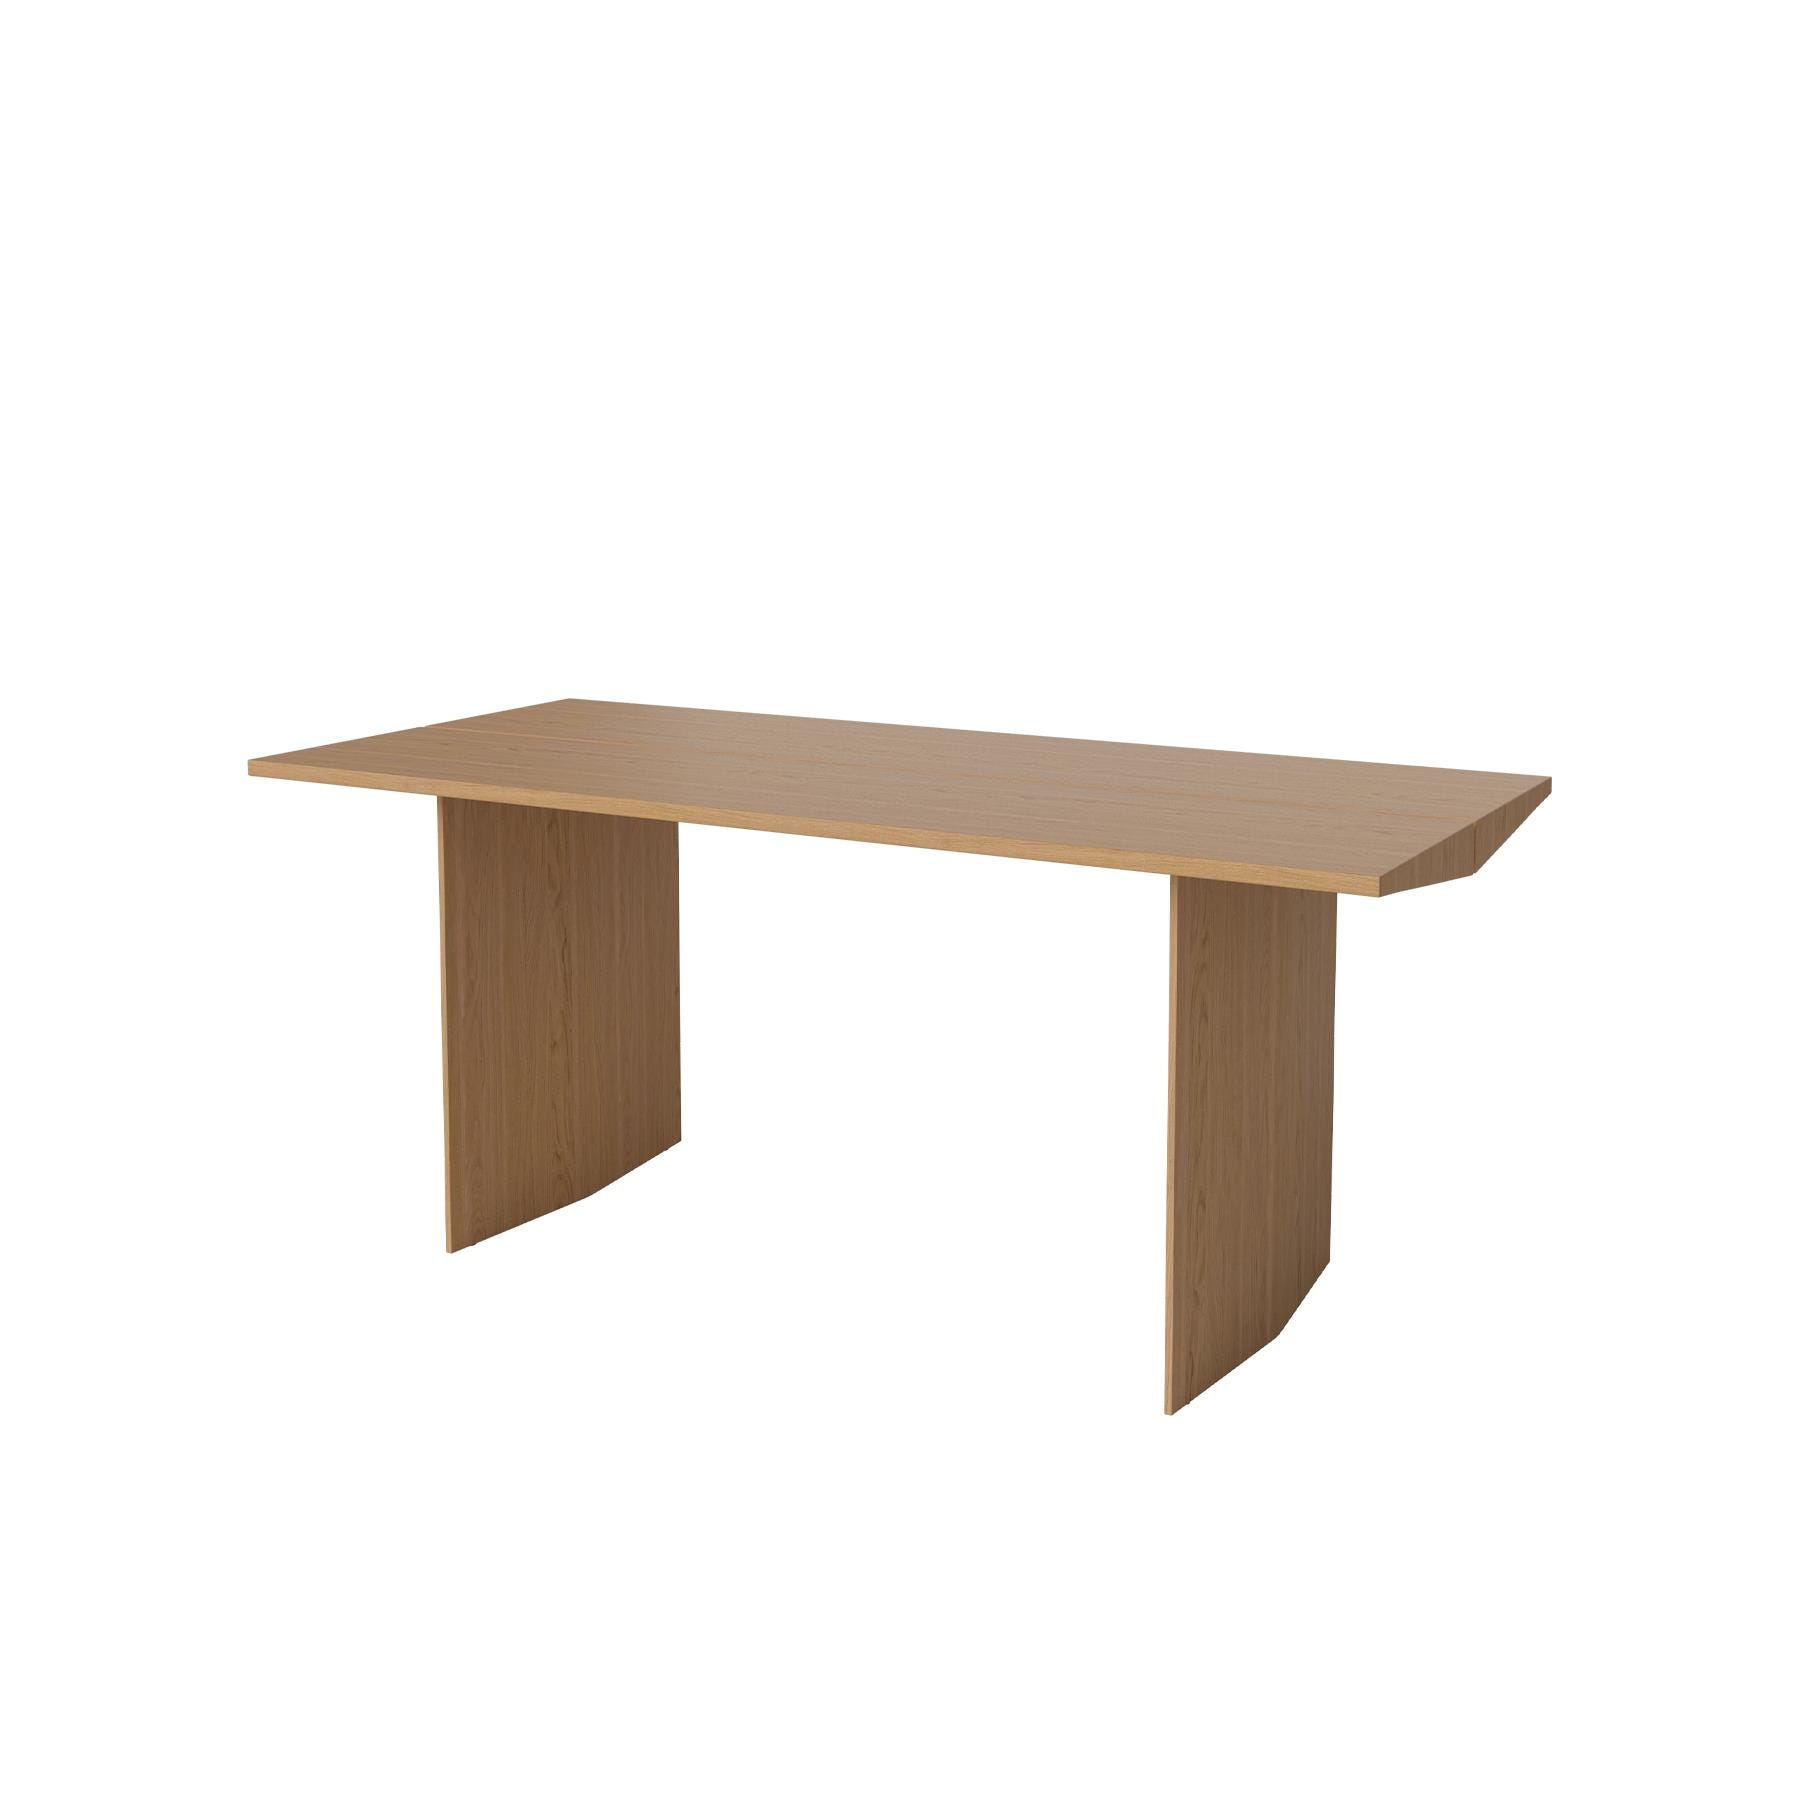 Bolia Alp Dining Table Oiled Oak Lenghth 200cm Light Wood Designer Furniture From Holloways Of Ludlow